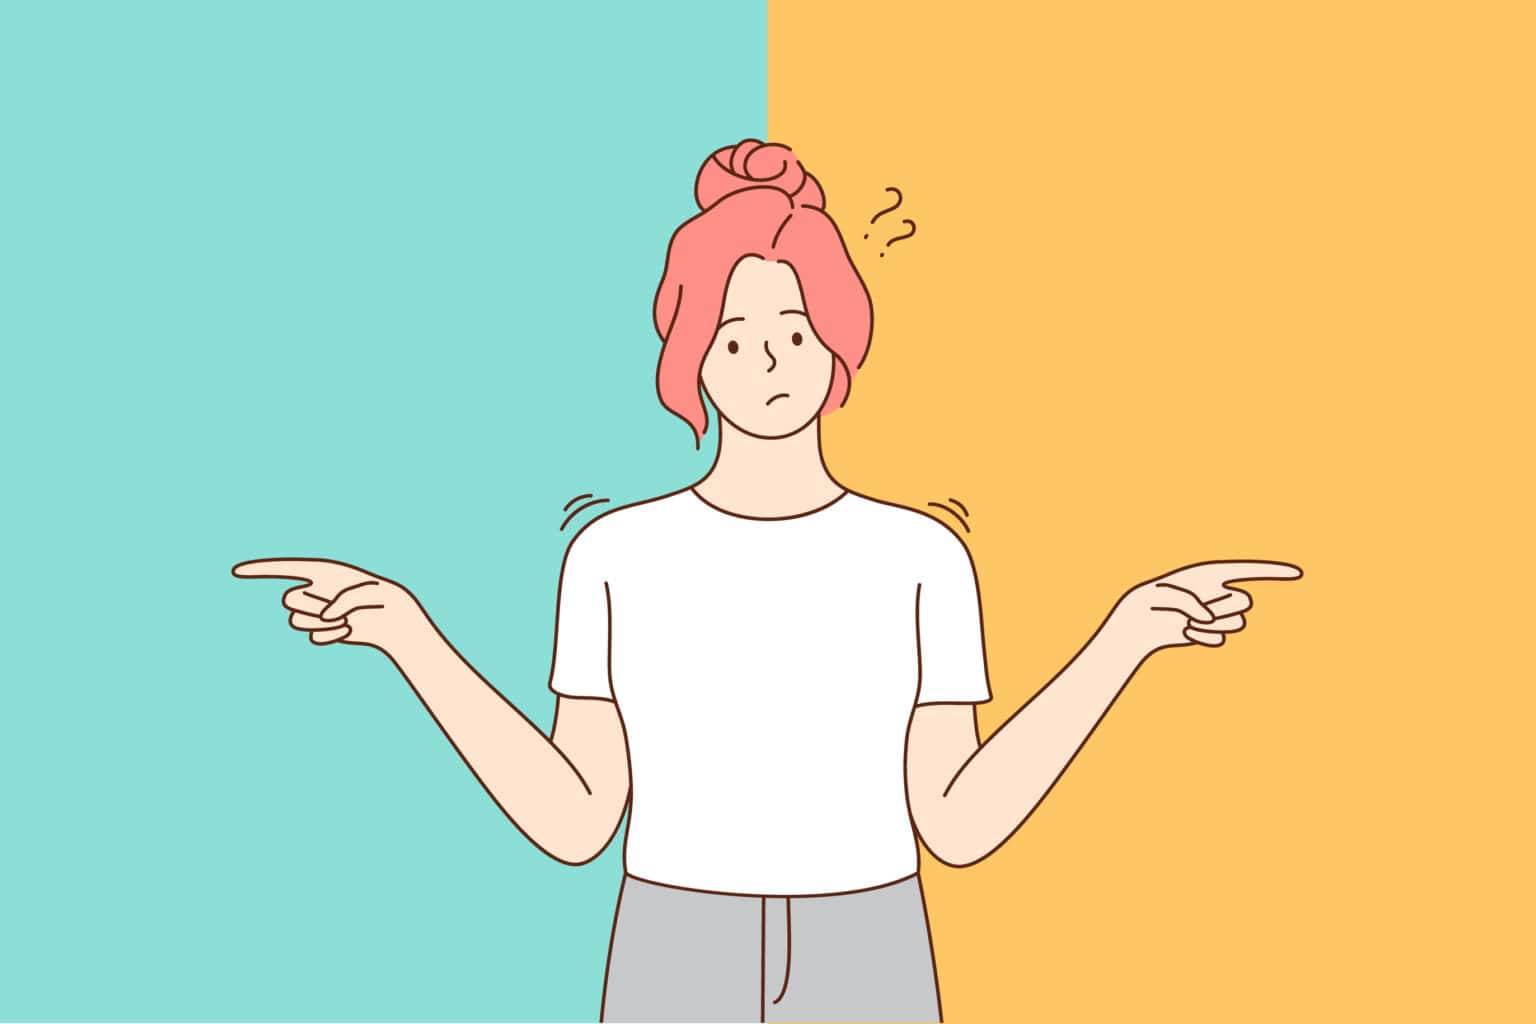 Drawing of woman with light skin, pink hair in a bun, wearing white t-shirt and grey pants. Pointing to left and right with hands, question marks above face, suggesting dilemma between insurance vs. bonds